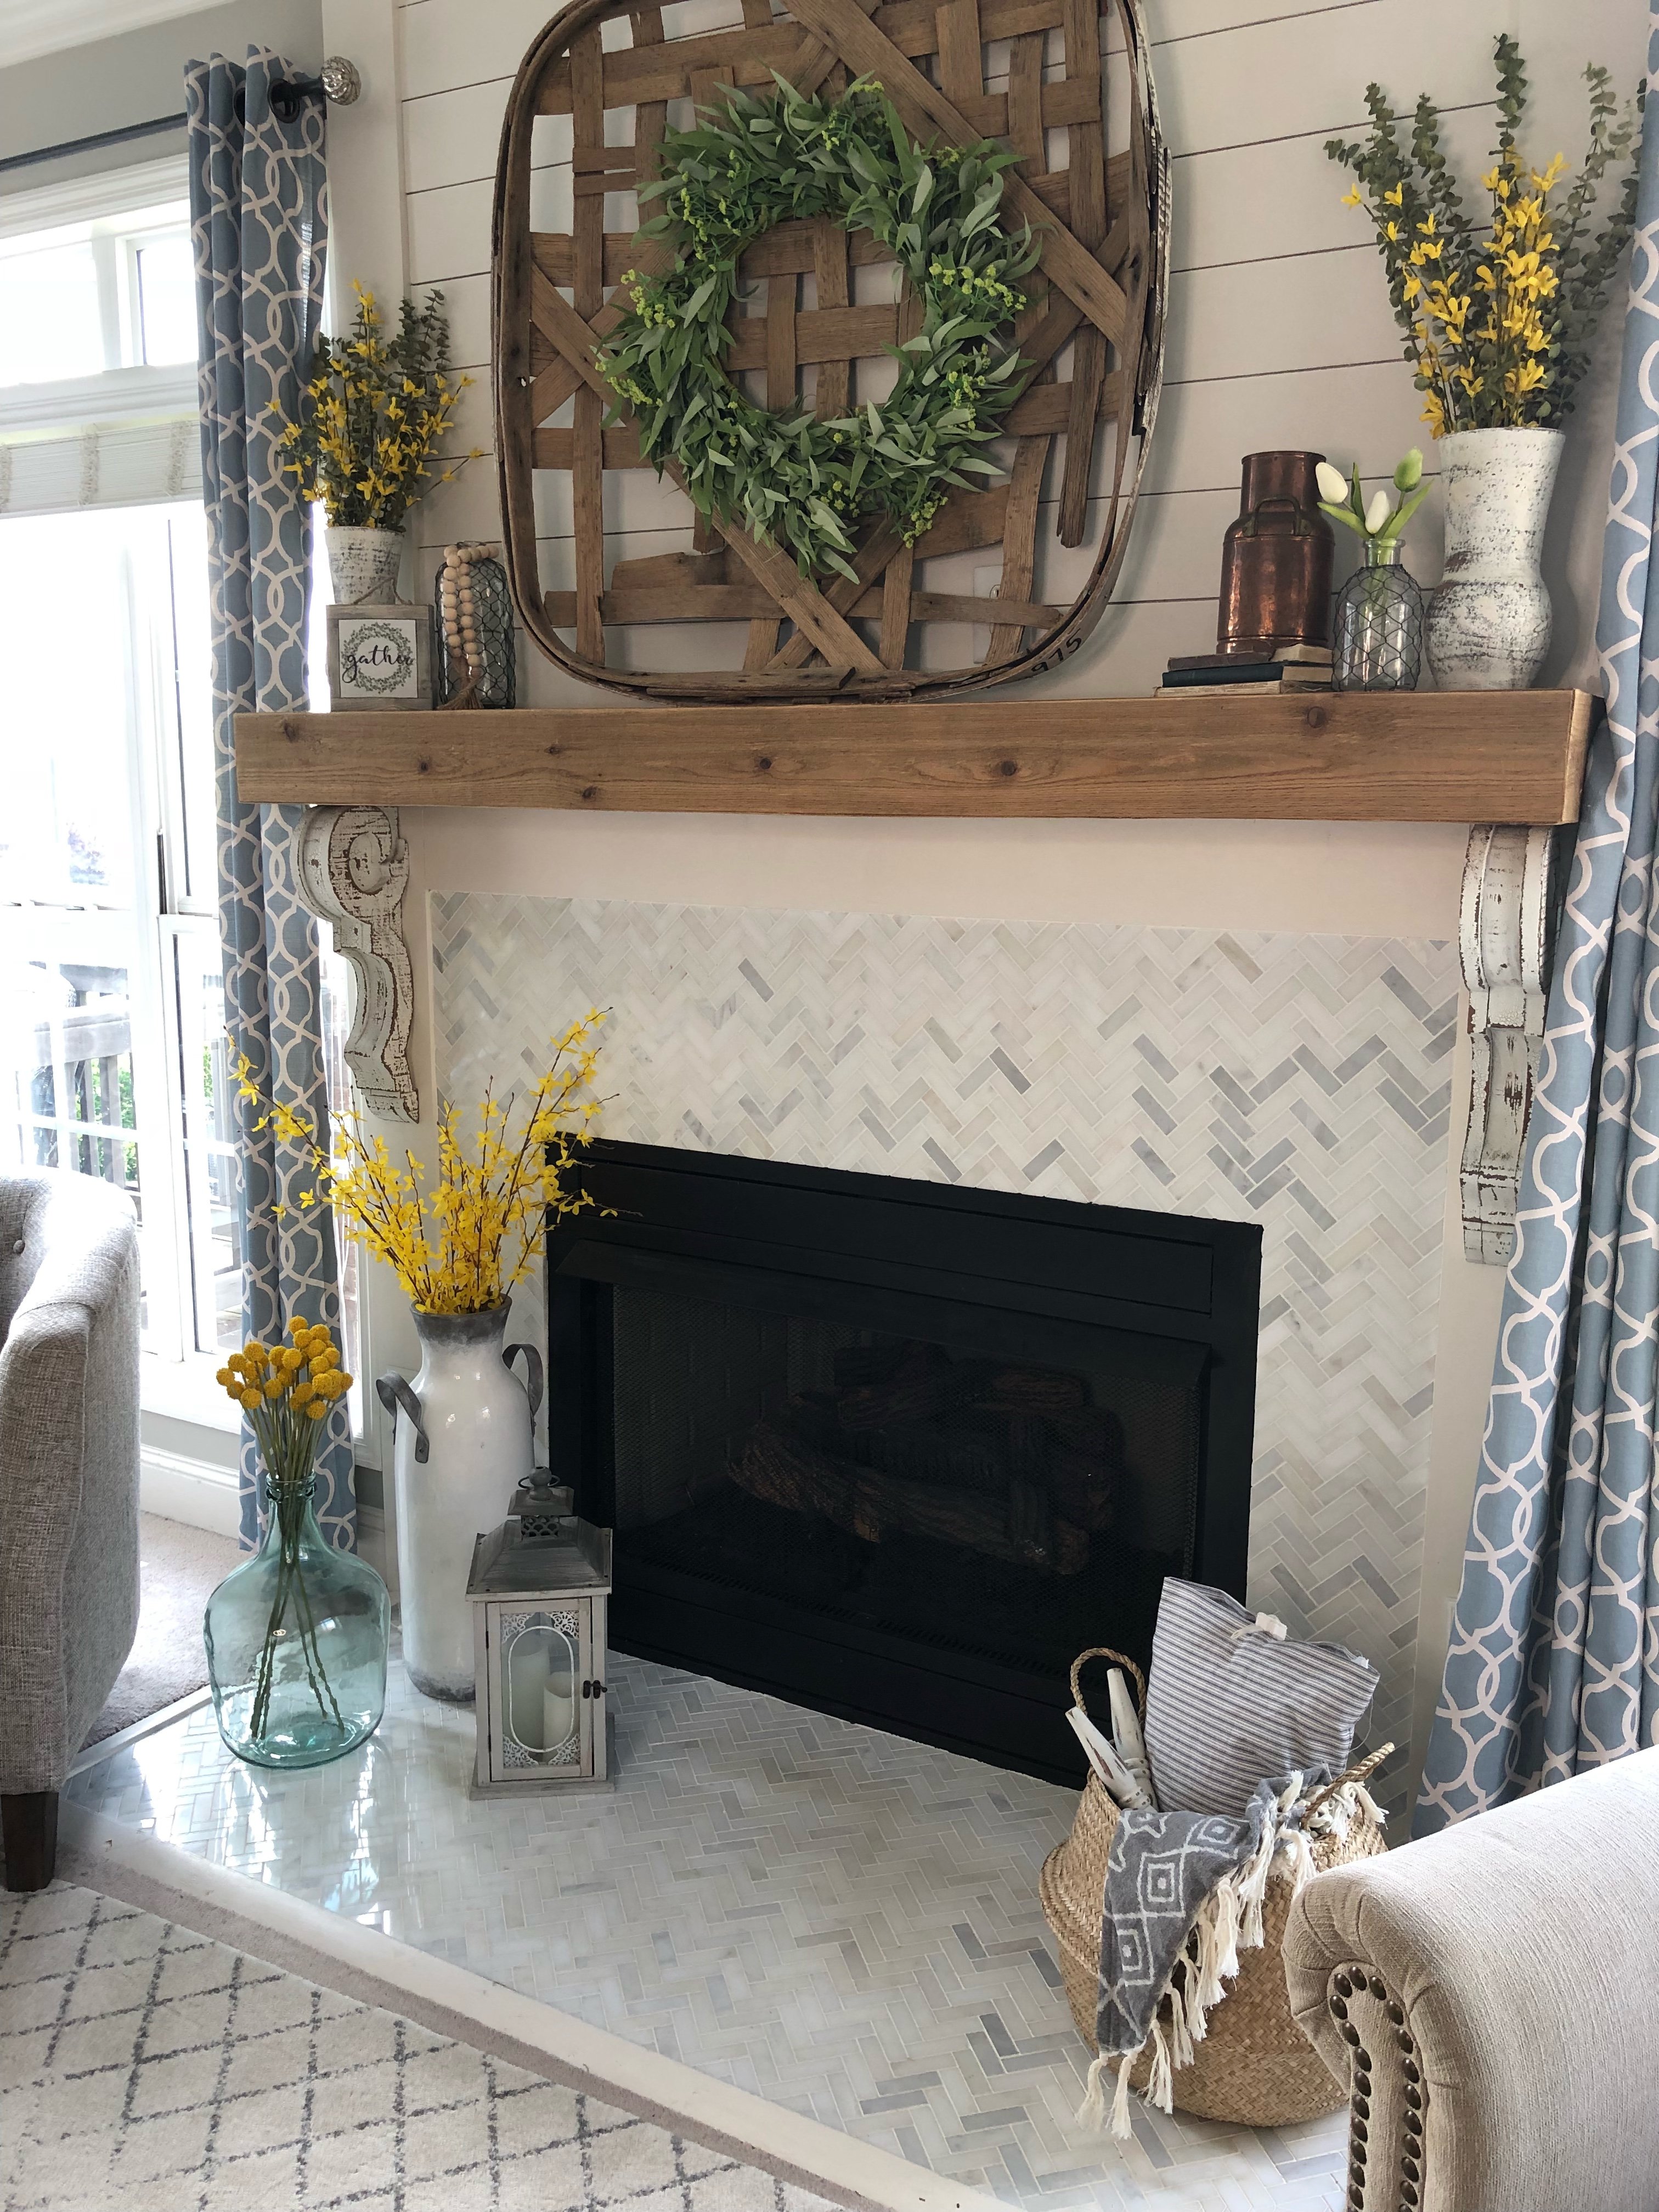 2 small home decor changes you can make for a big impact, my fireplace, farmhouse, shiplap and herringbone tile